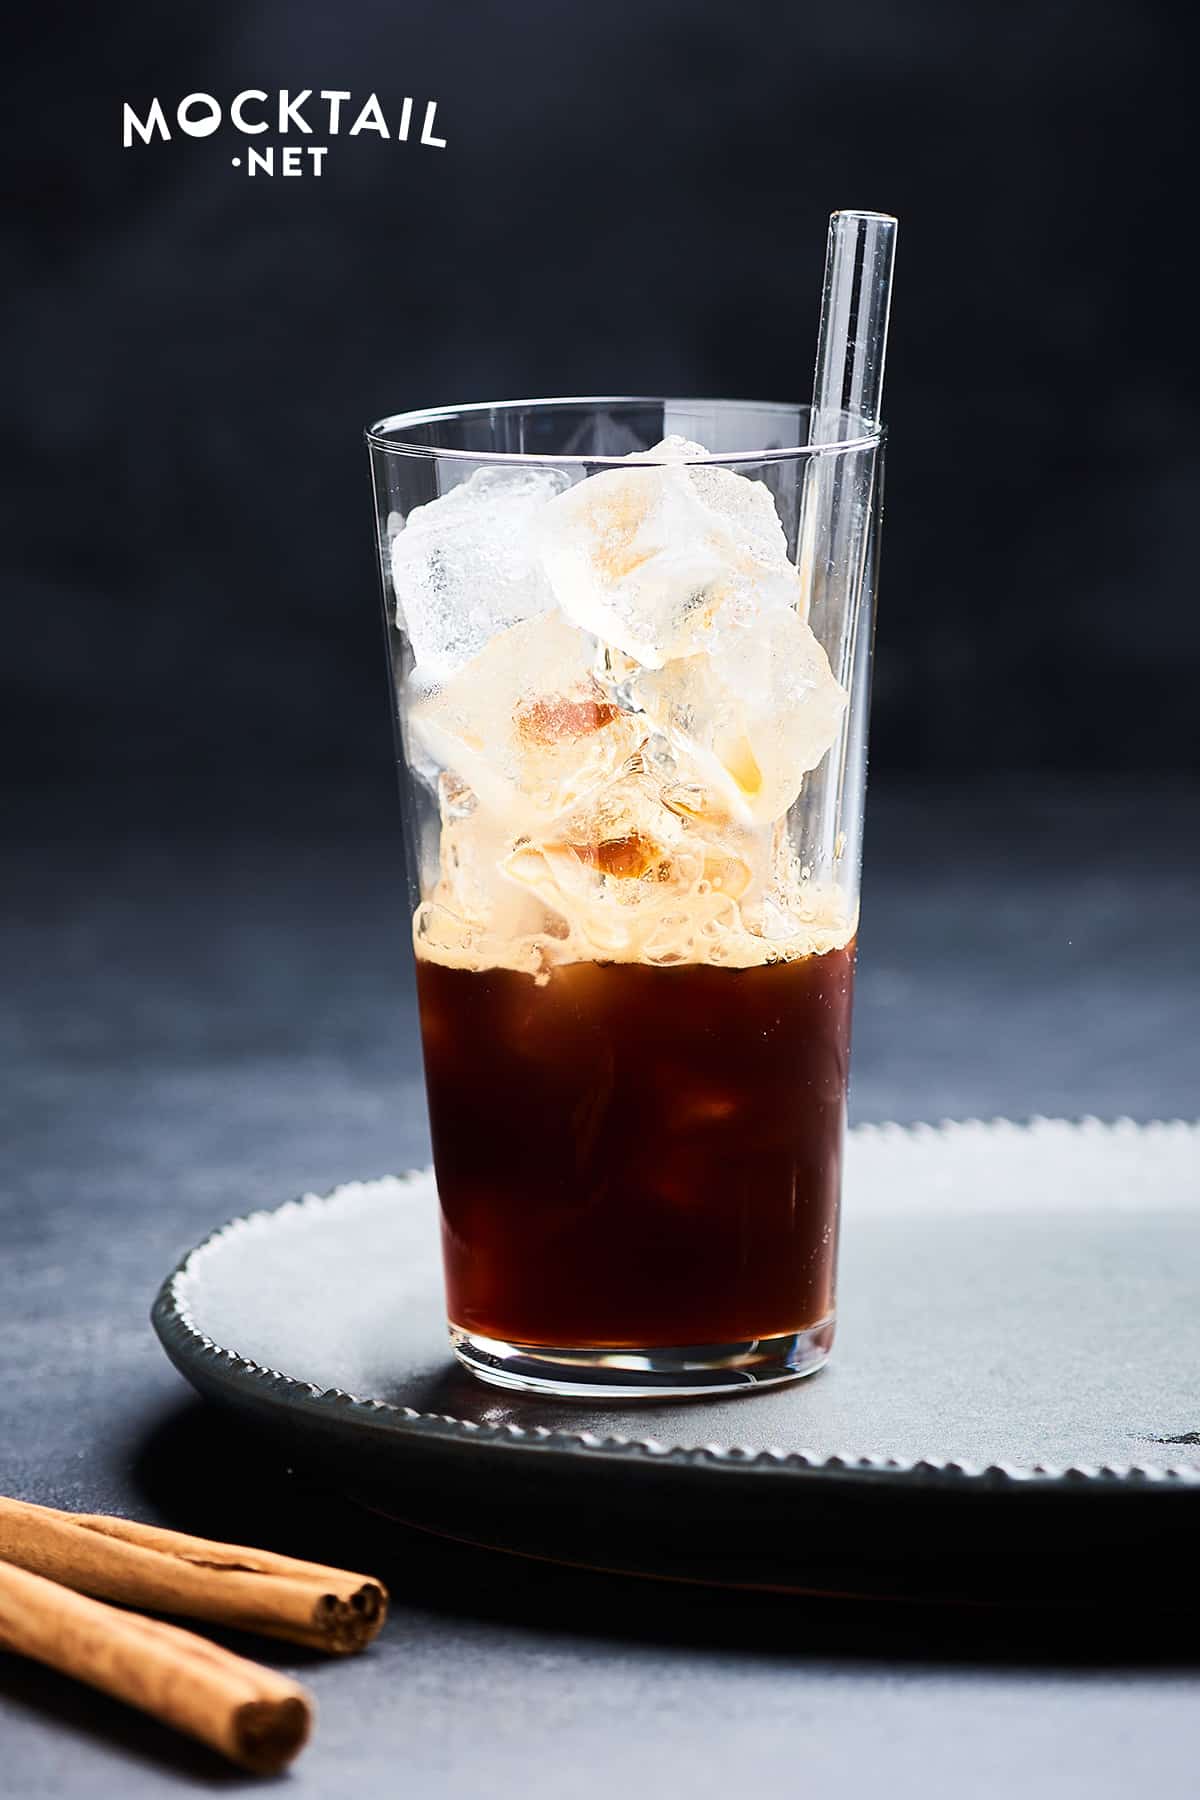 use this recipe to make your own iced cappuccino